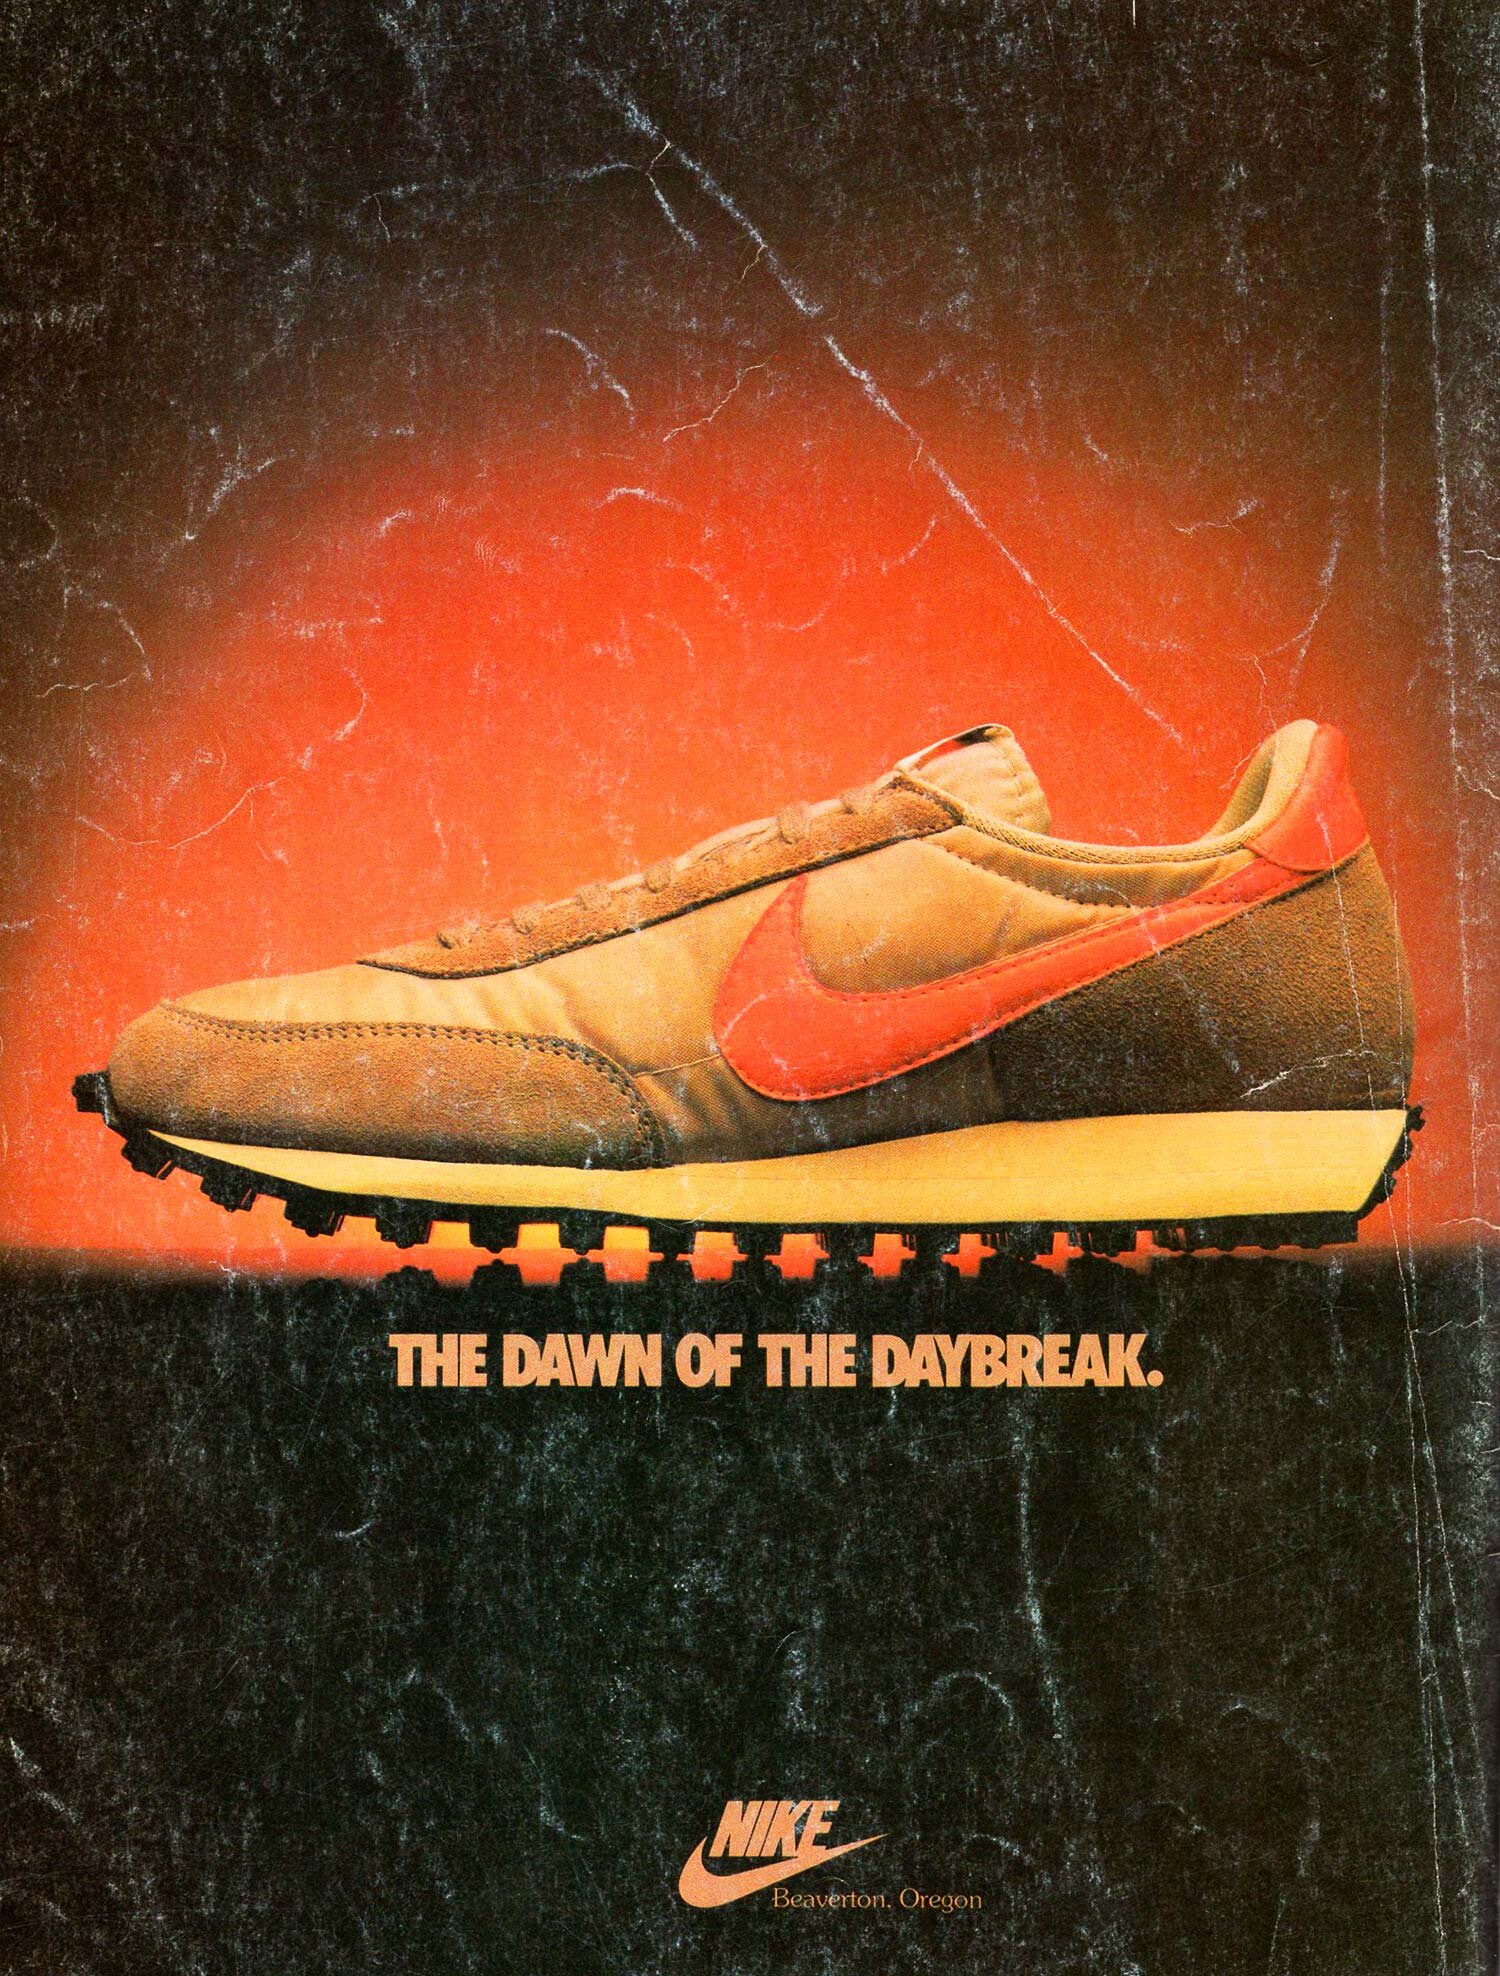 Deffest®. A vintage and retro blog. — Nike vintage sneaker ad from 1980